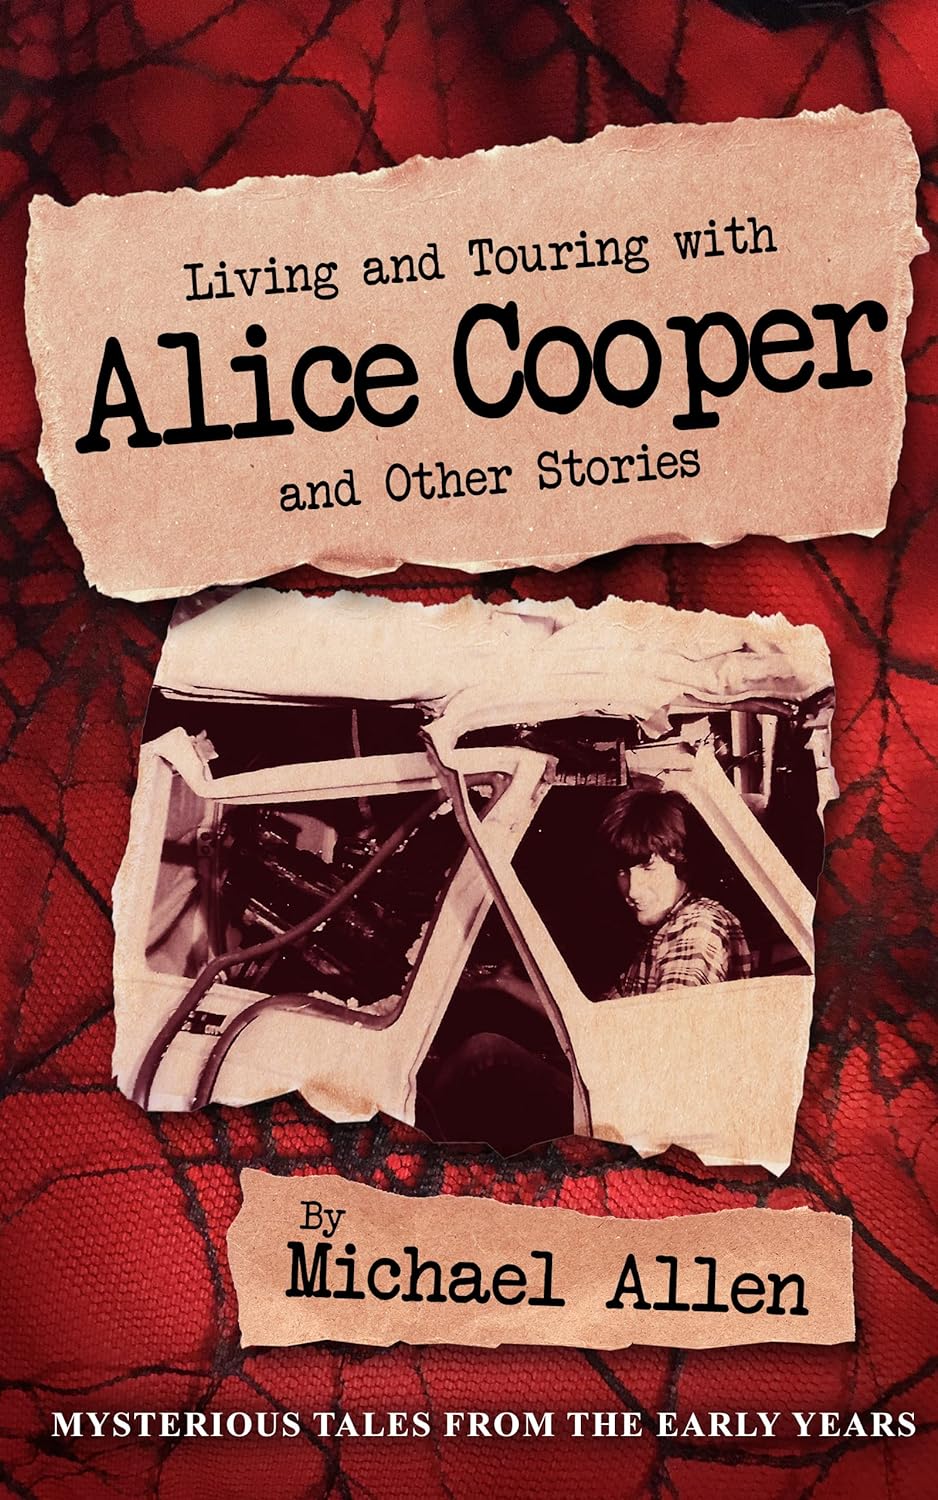 New memoir "Living and Touring with Alice Cooper" by Michael Allen is released, a firsthand account of life on the road with The Kings of Shock Rock